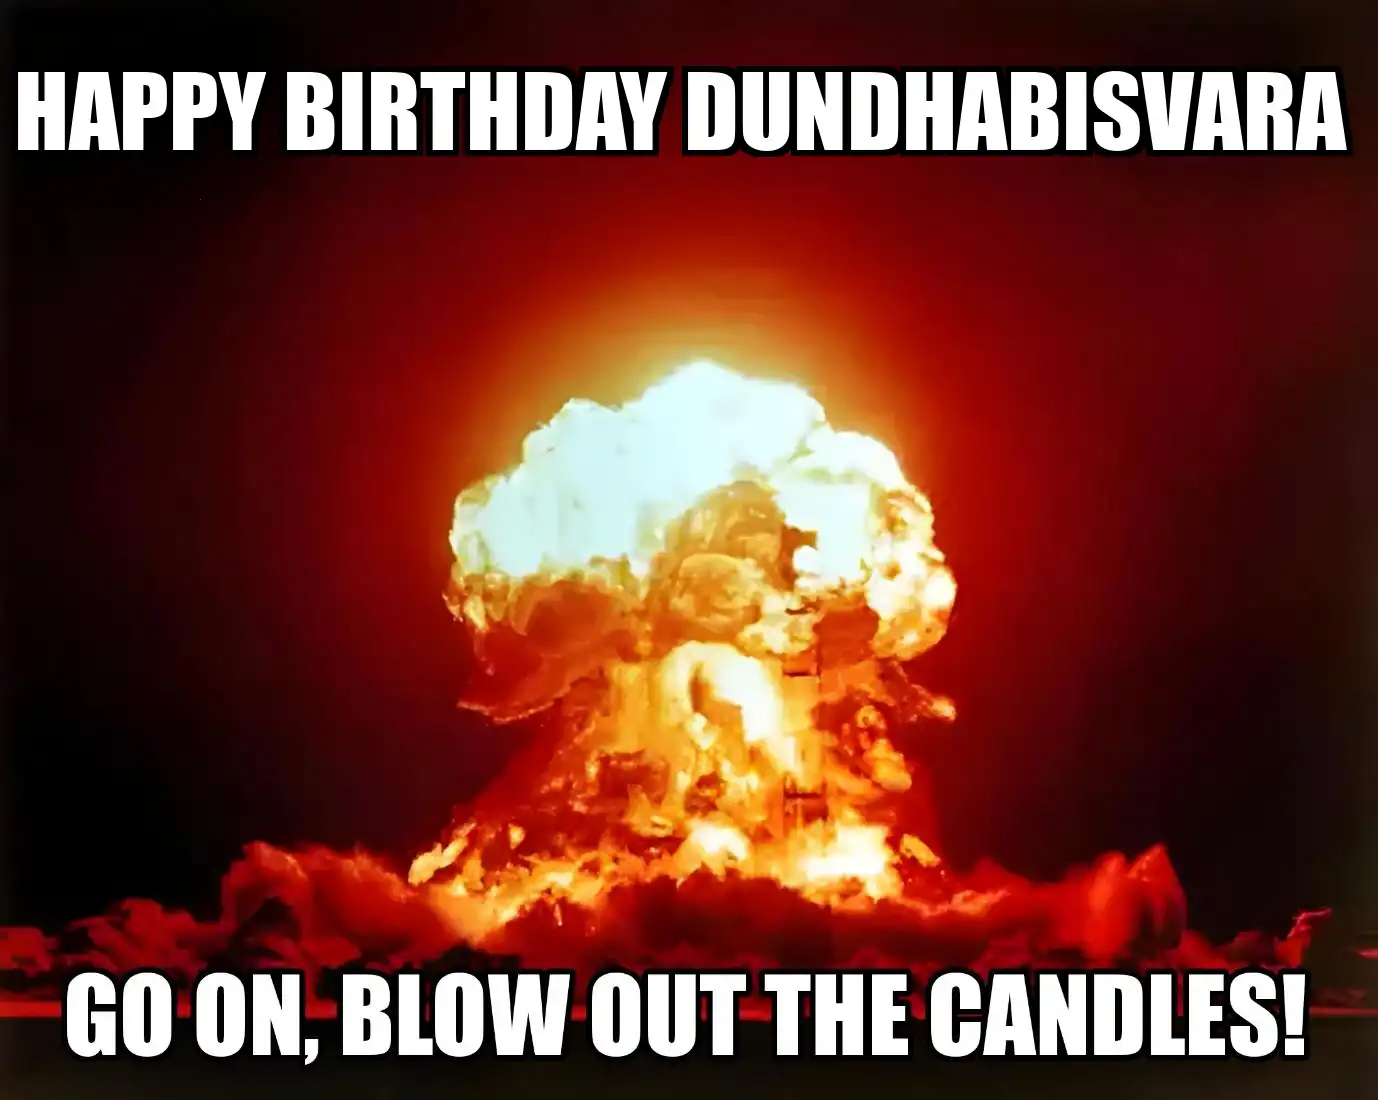 Happy Birthday Dundhabisvara Go On Blow Out The Candles Meme